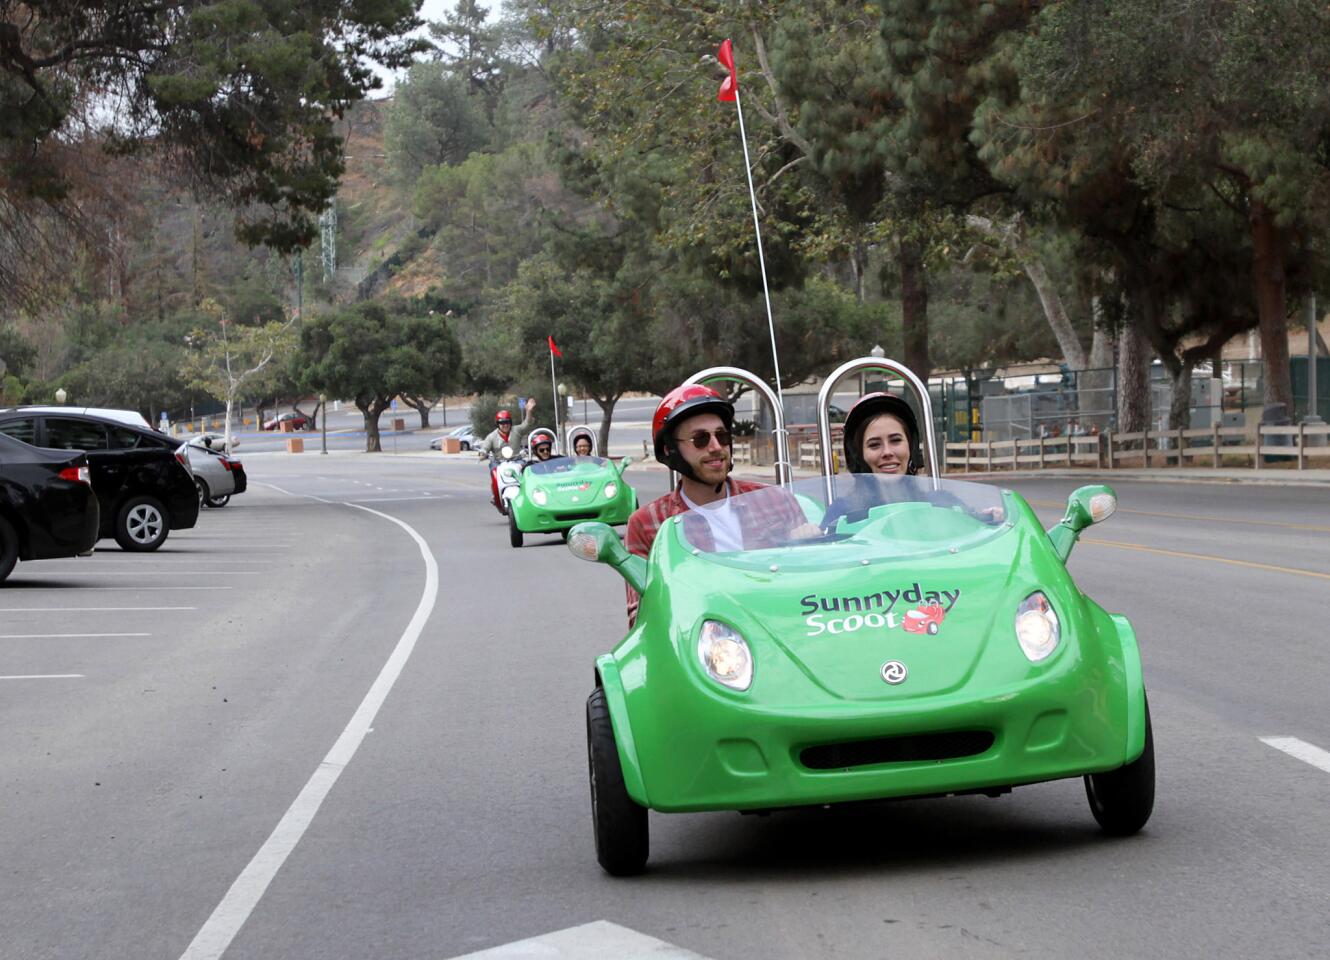 Taylor Kenney, 22 of Los Angeles, drives a three-wheel scooter with friend Cameron Sarradet, by the Greek Theatre during a three-hour, Red Carpet tour offered by Burbank-based Sunnyday Scoot on Friday, June 5, 2015.